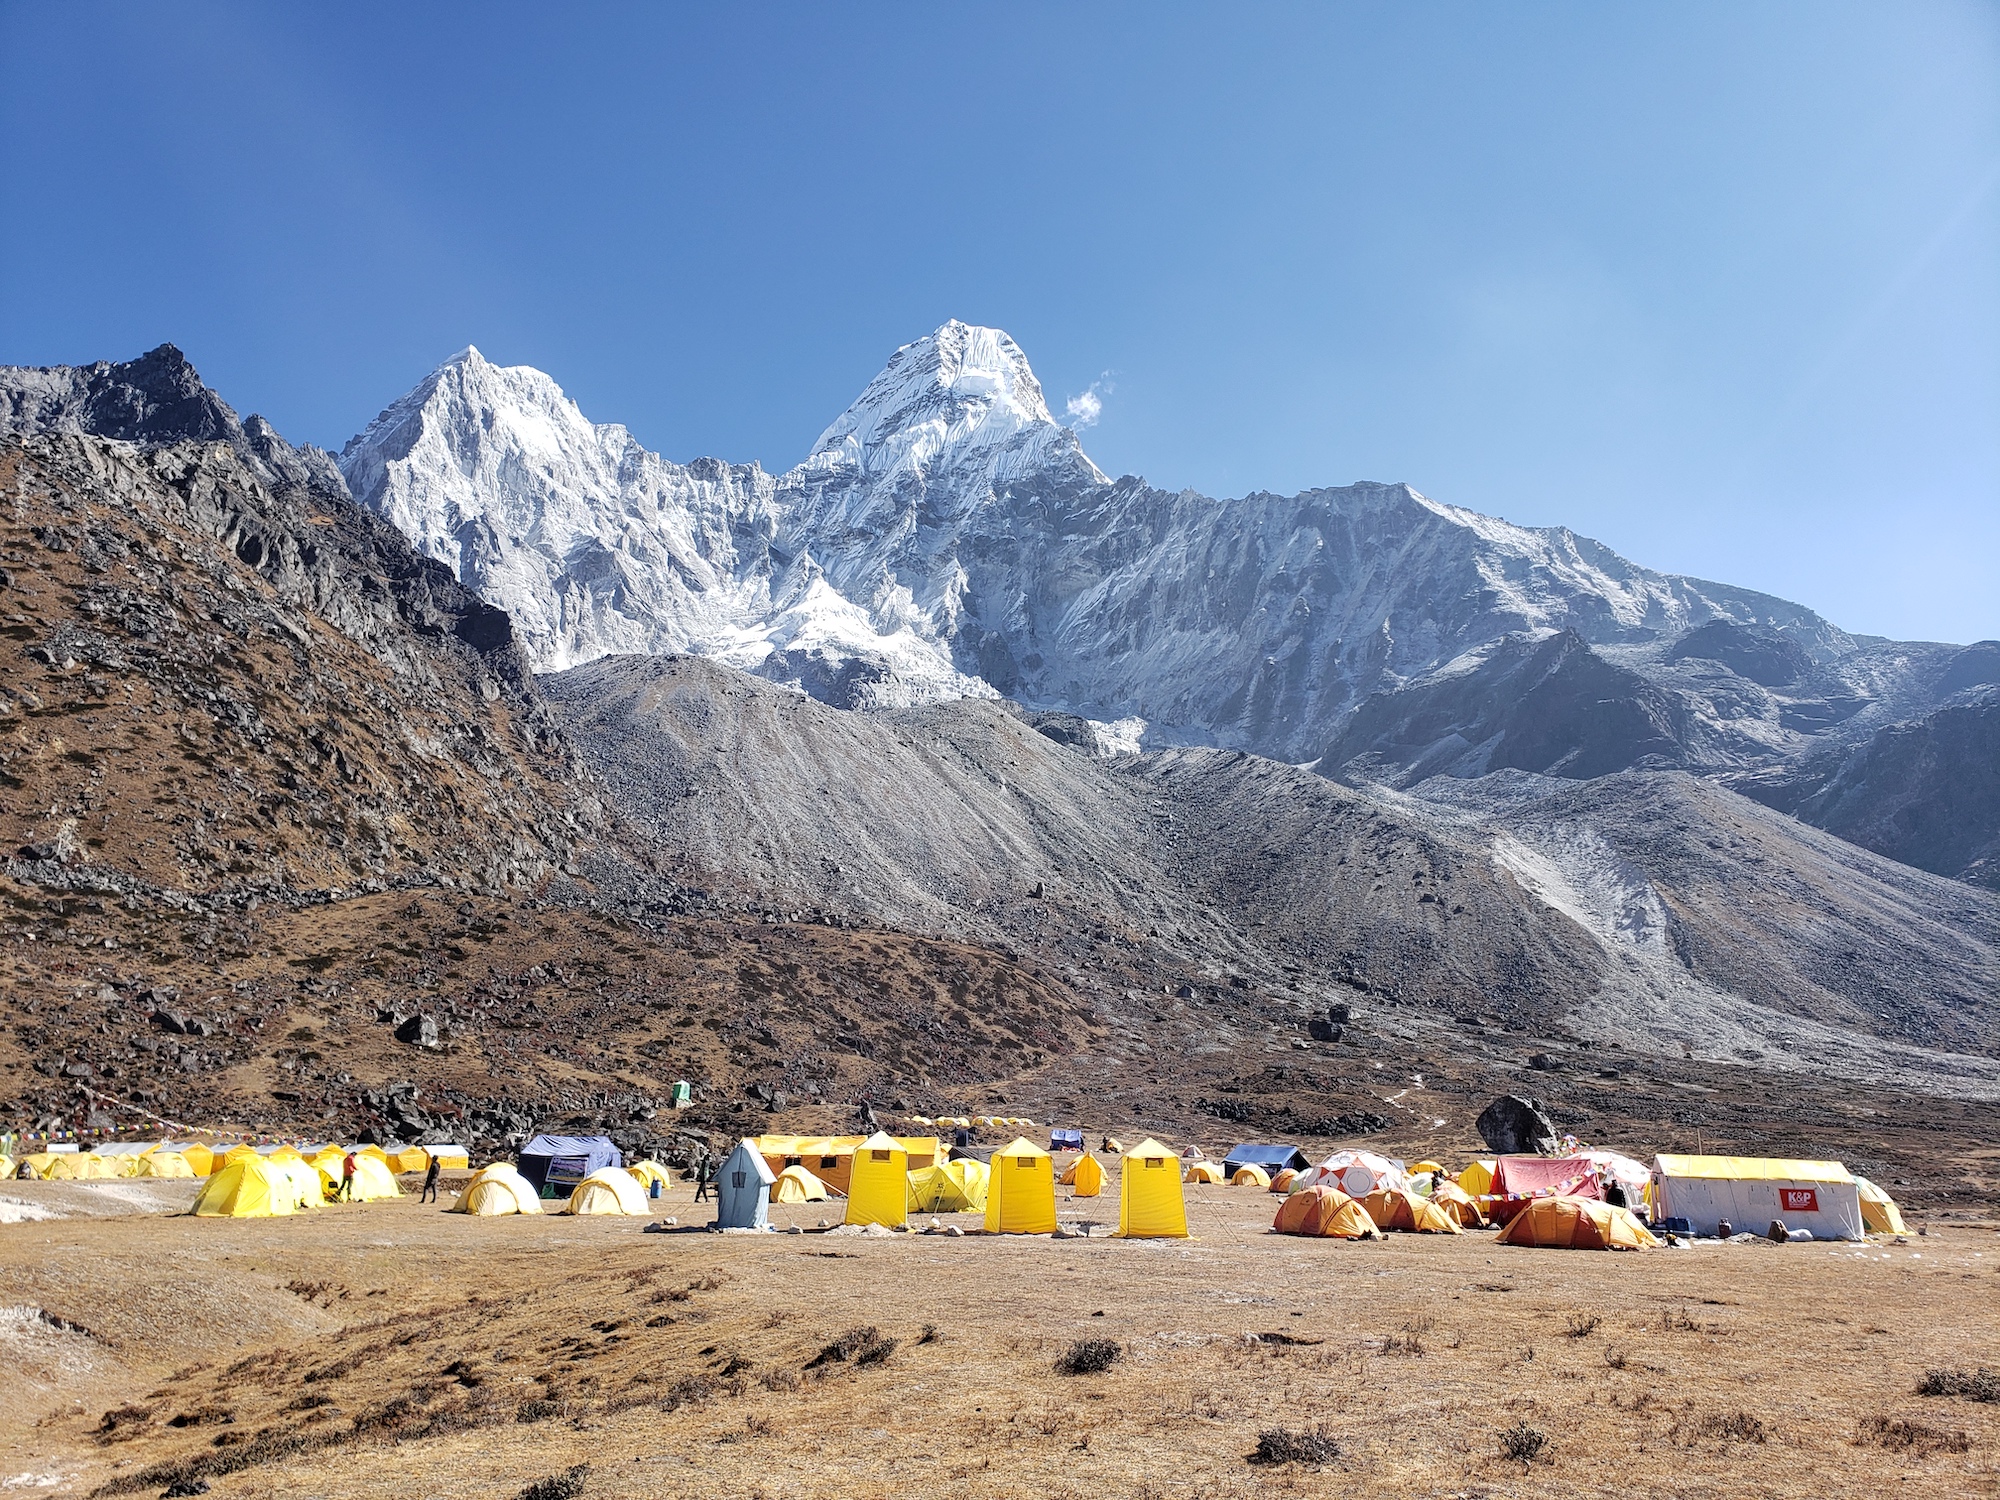 Want to climb Ama Dablam in just 14 days with our certified guides? Here are our frequently asked questions about climbing Ama Dablam.